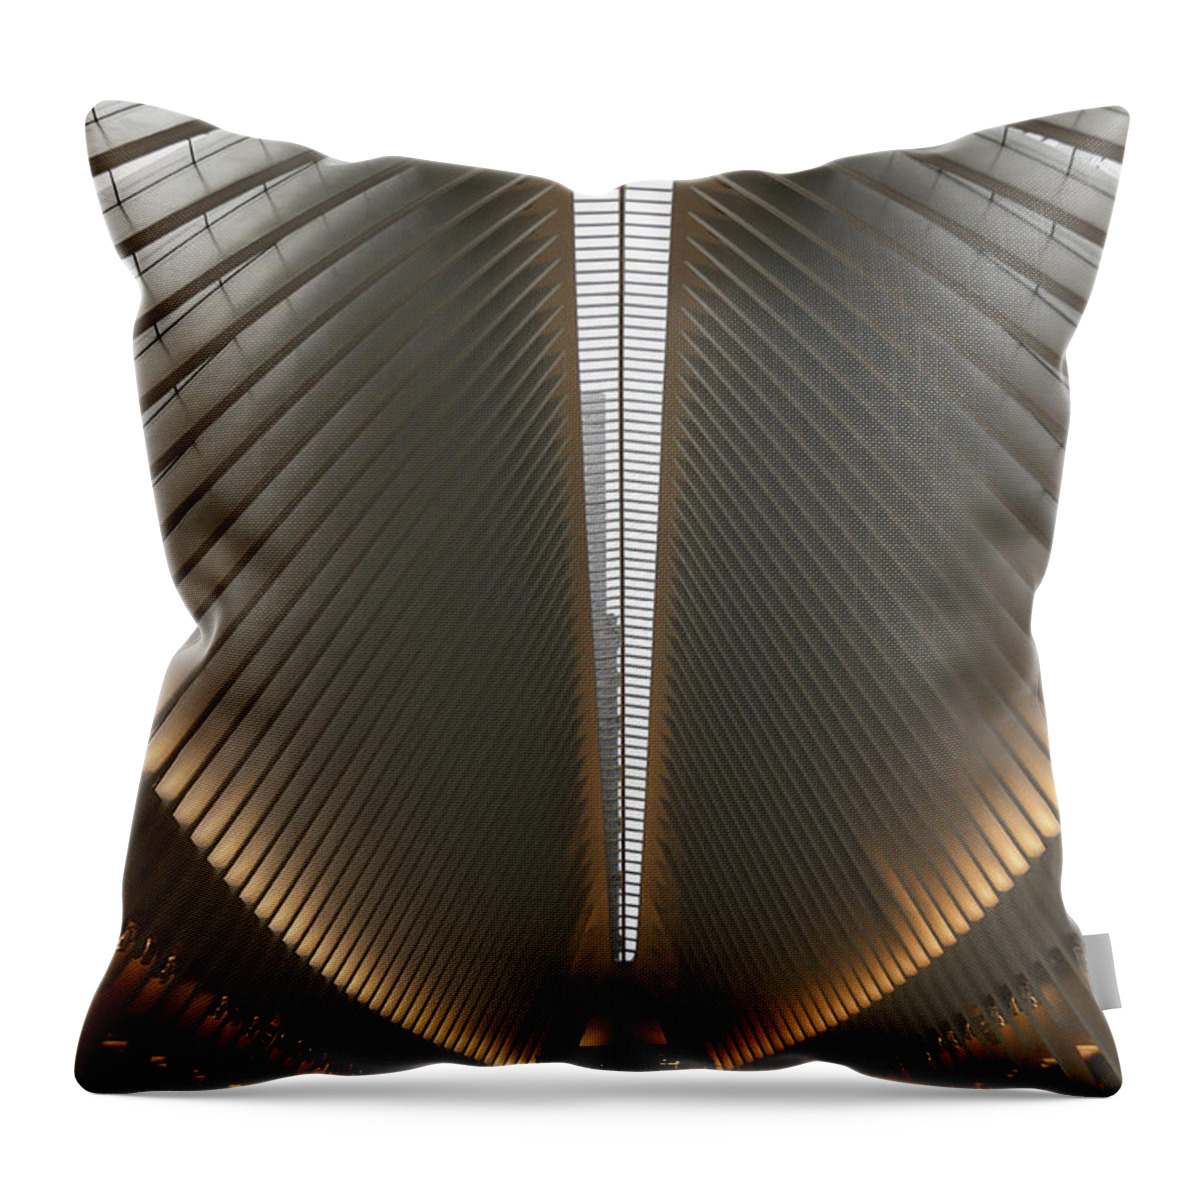 Ribcage Throw Pillow featuring the photograph Ribcage by Peter Hull